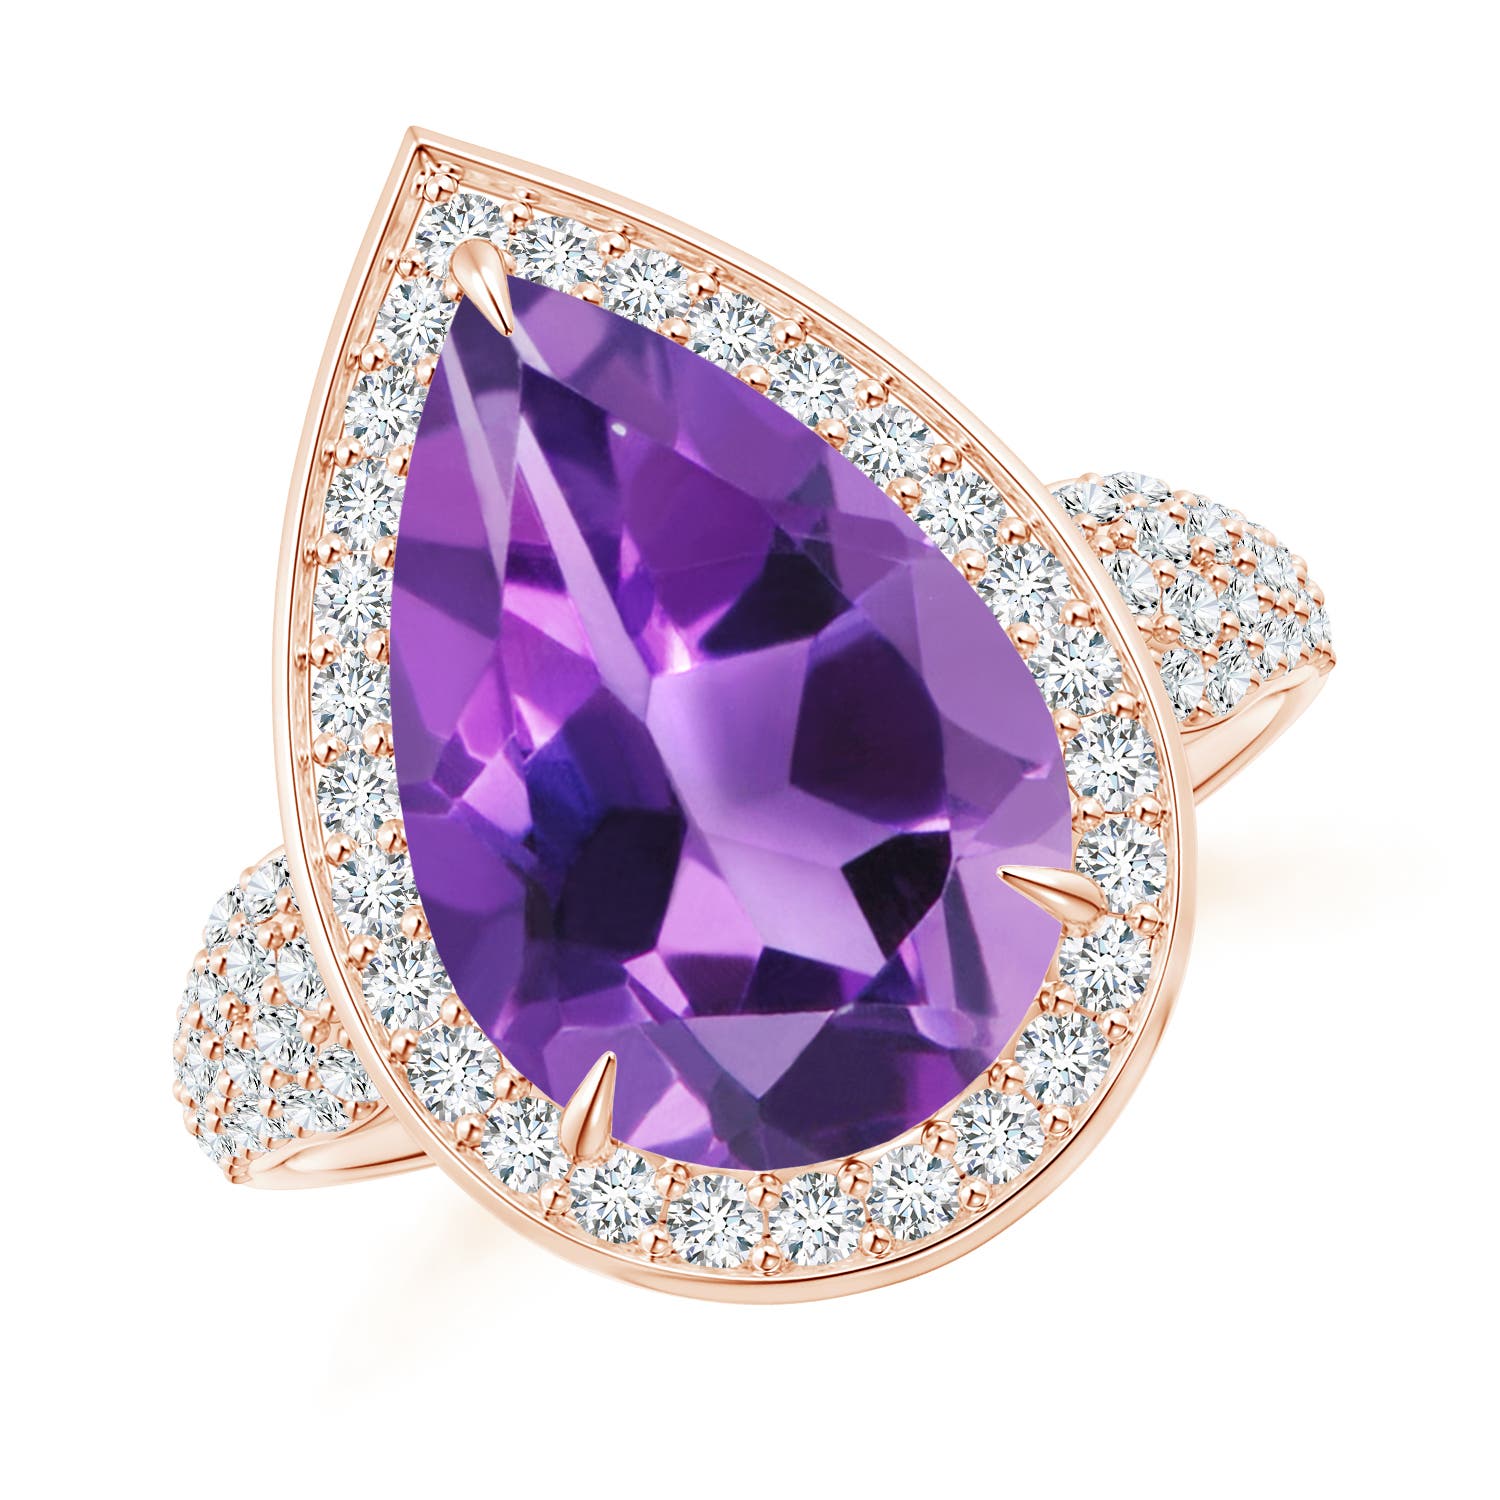 AAA - Amethyst / 5.48 CT / 14 KT Rose Gold